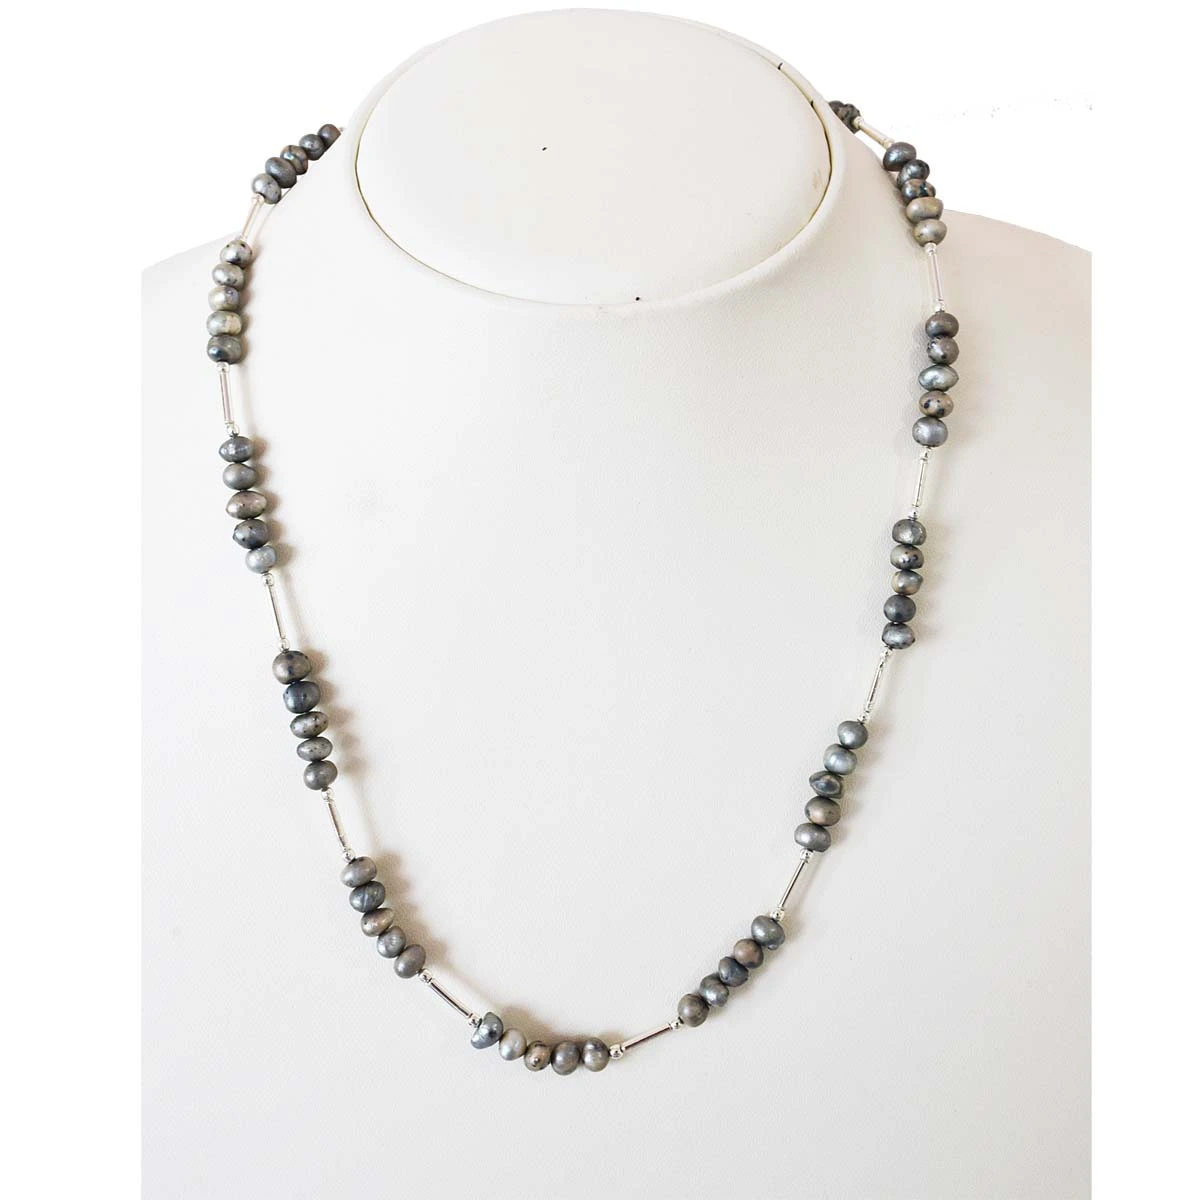 Single Line Real Gray Colored Pearl & Silver Plated Pipe Necklace for Women (SN995)